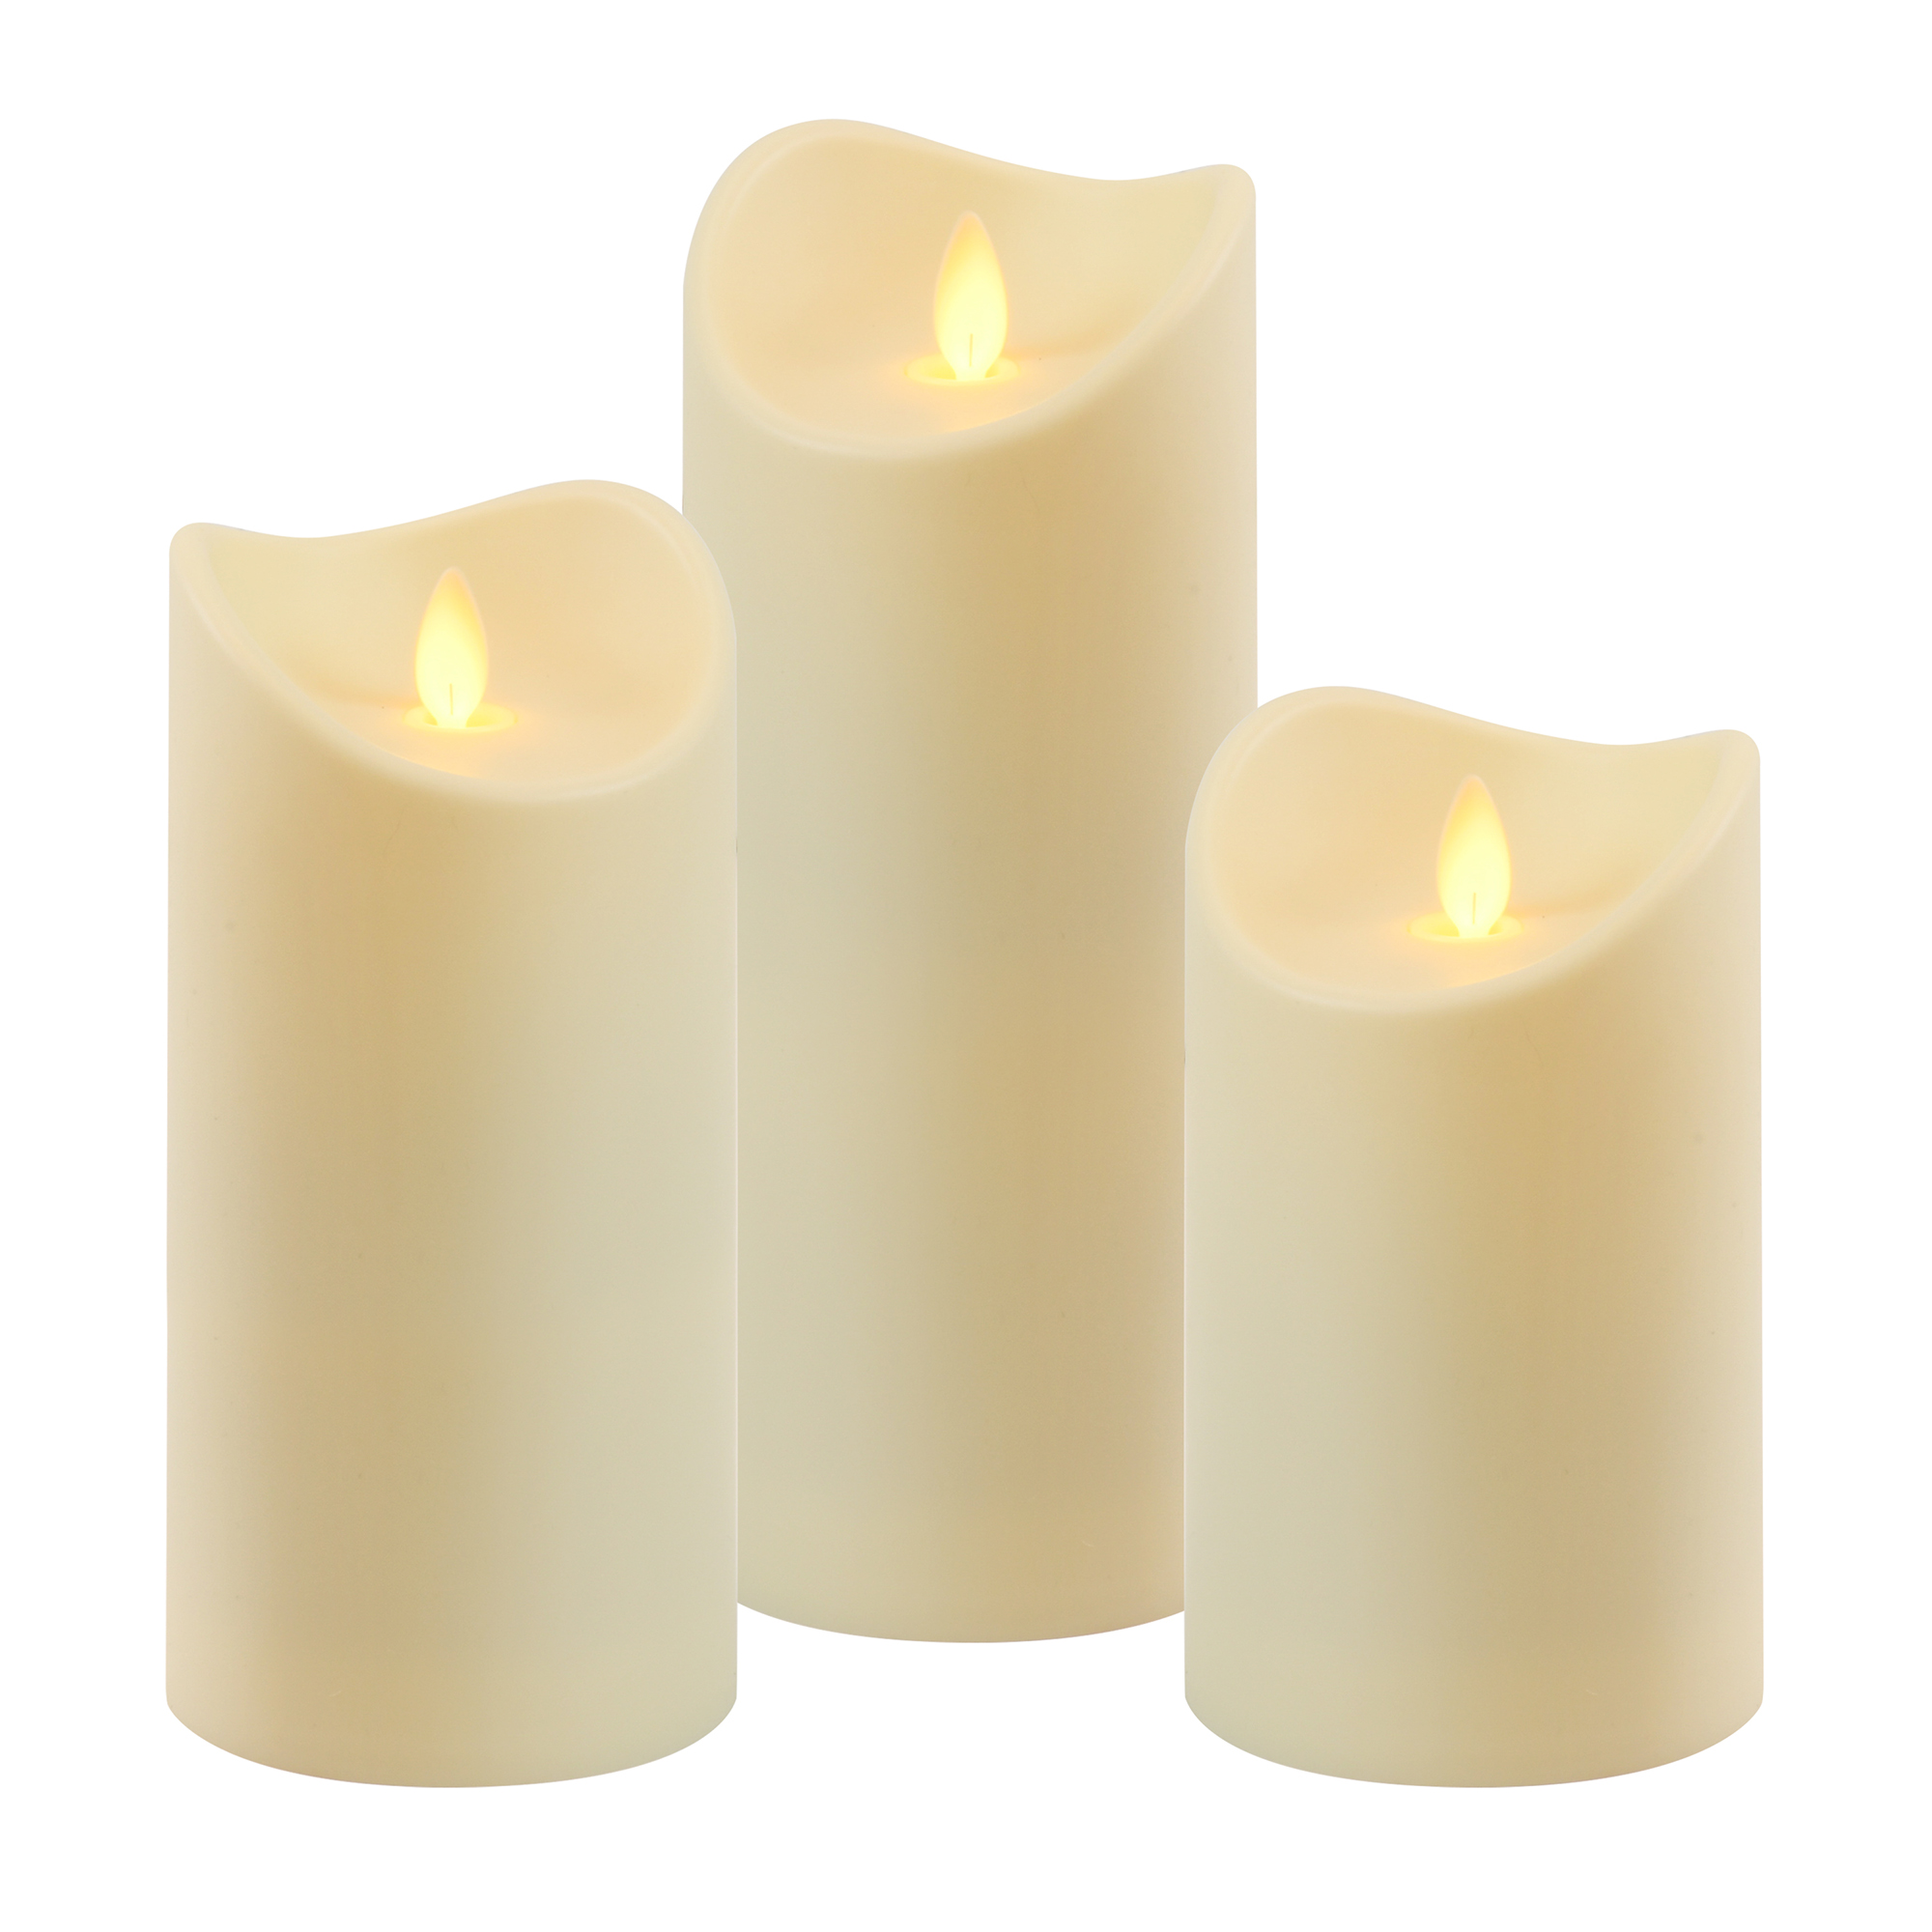 Gøre en indsats champion produktion Battery Operated LED Candles with Moving Flame - Set of 3 - LumaBase